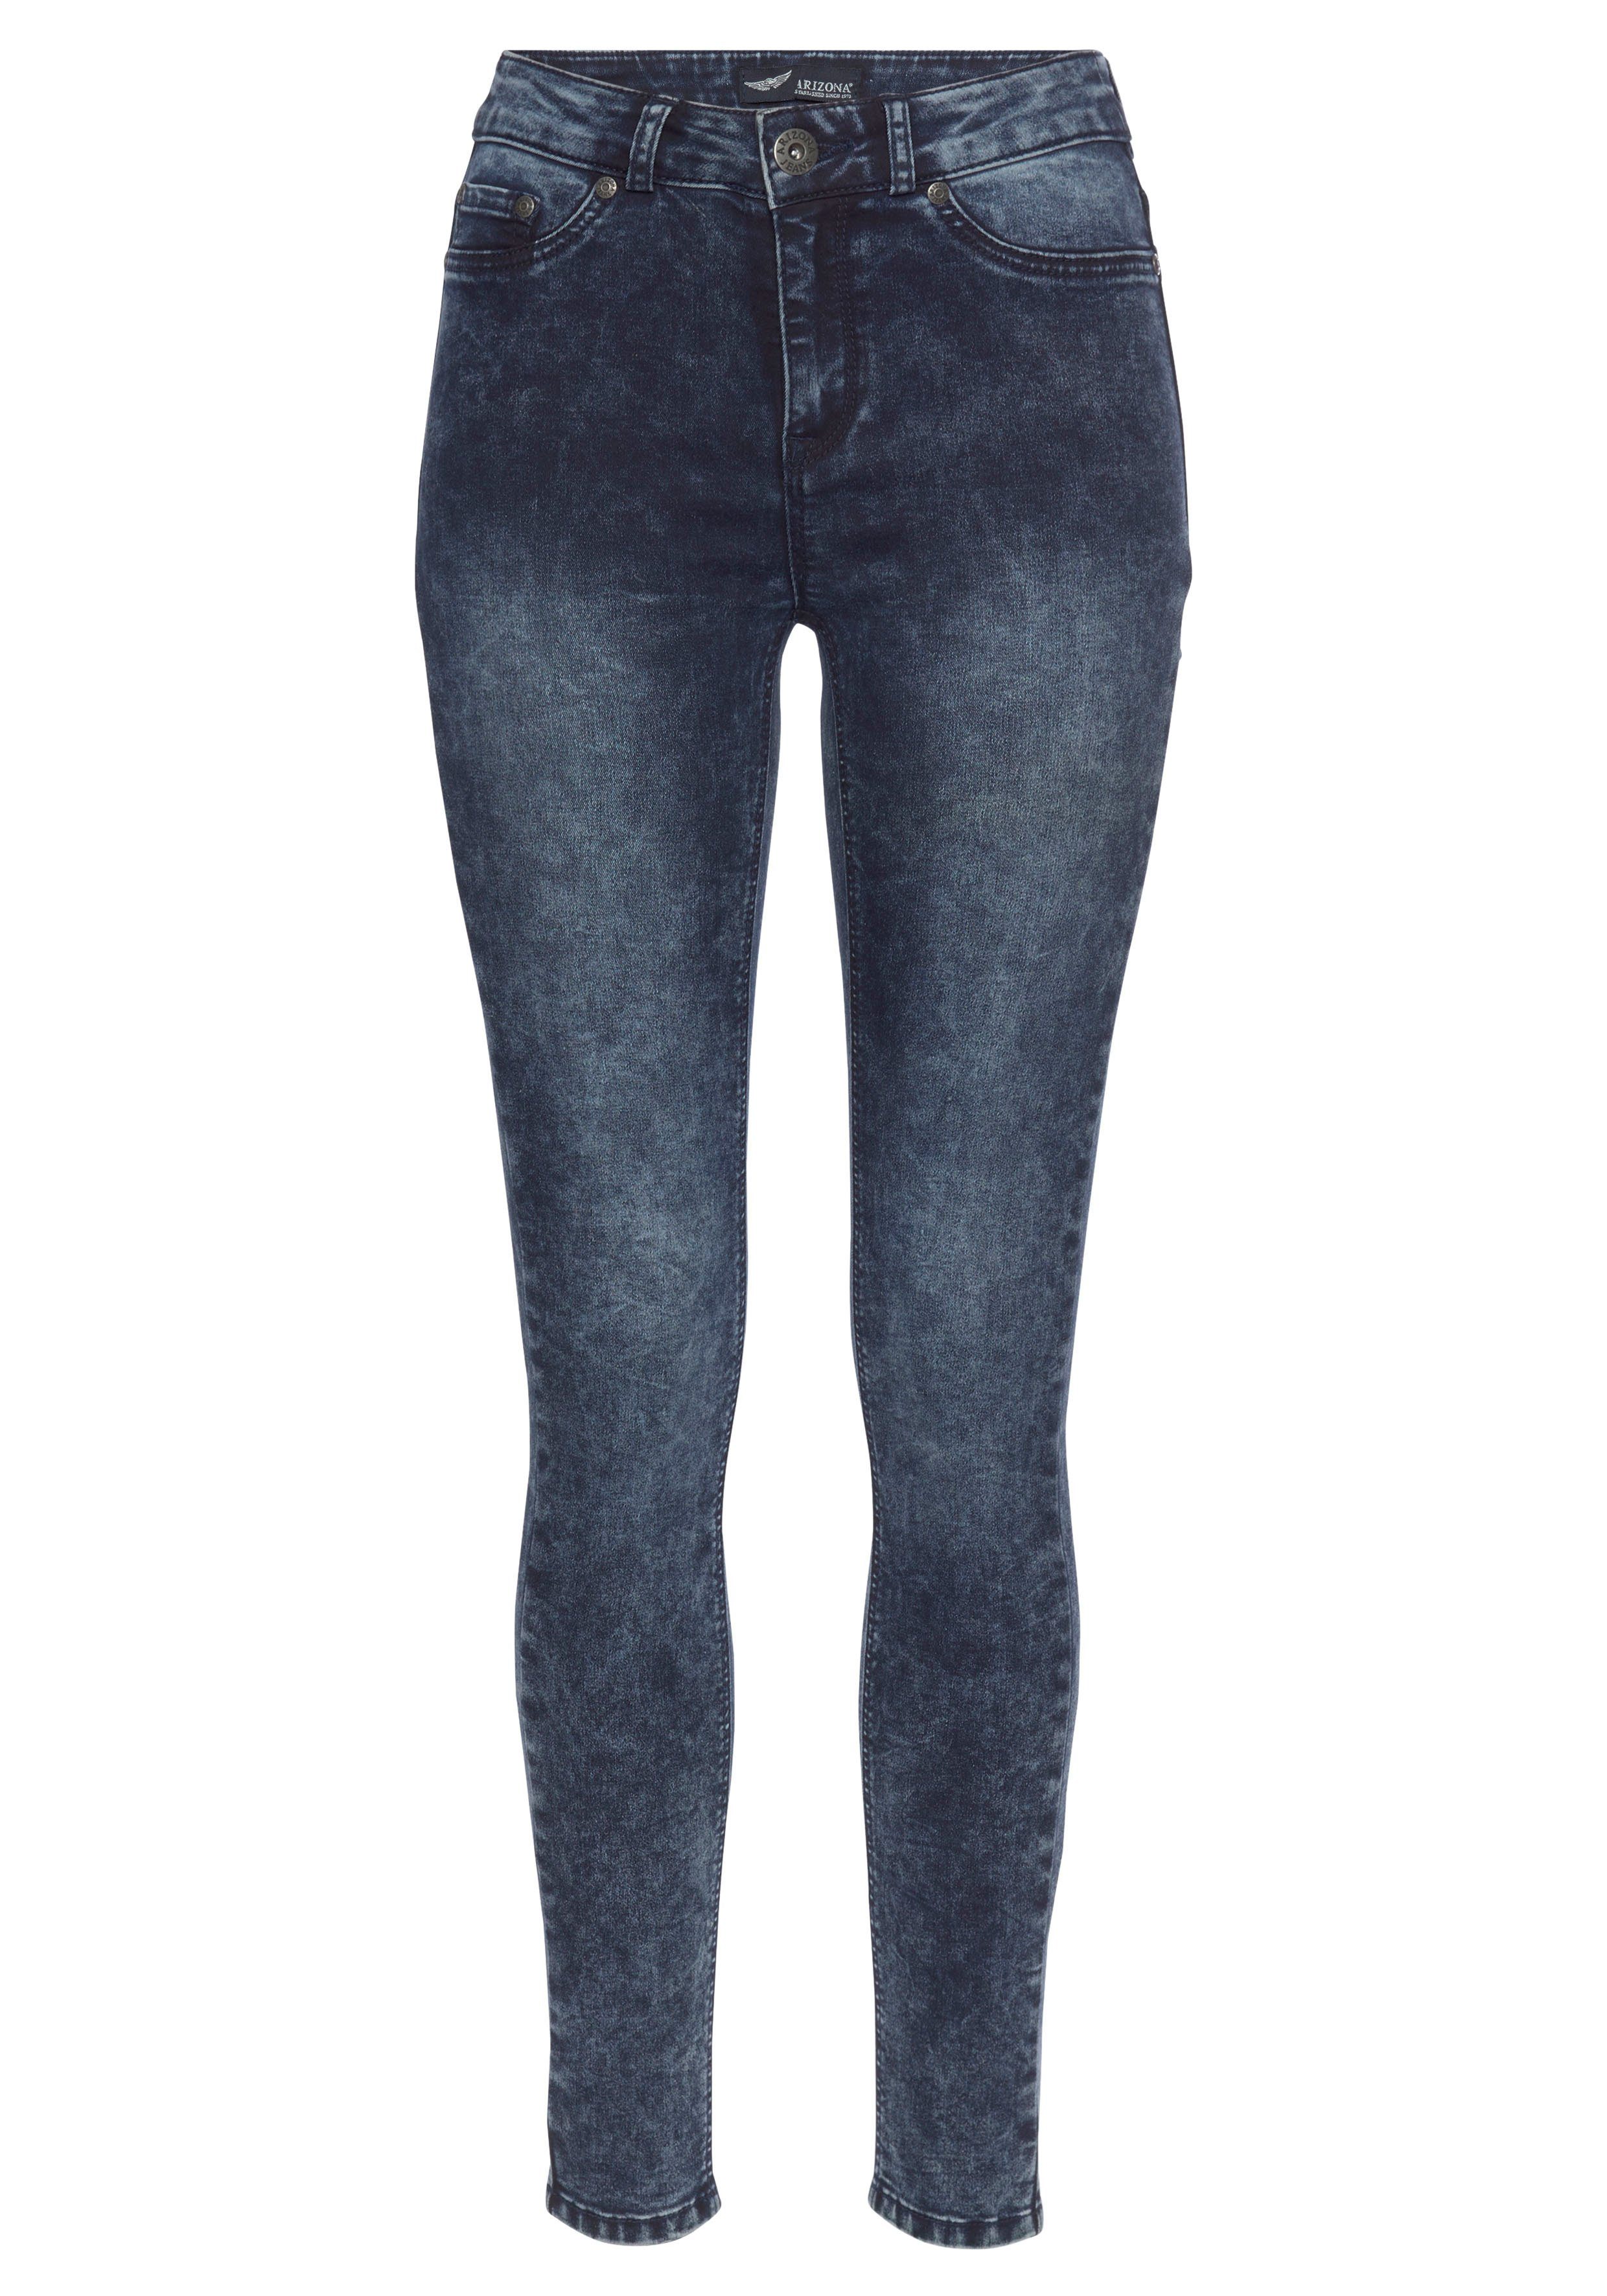 Arizona Skinny-fit-Jeans Ultra Stretch Jeans washed darkblue-moonwashed Moonwashed moon